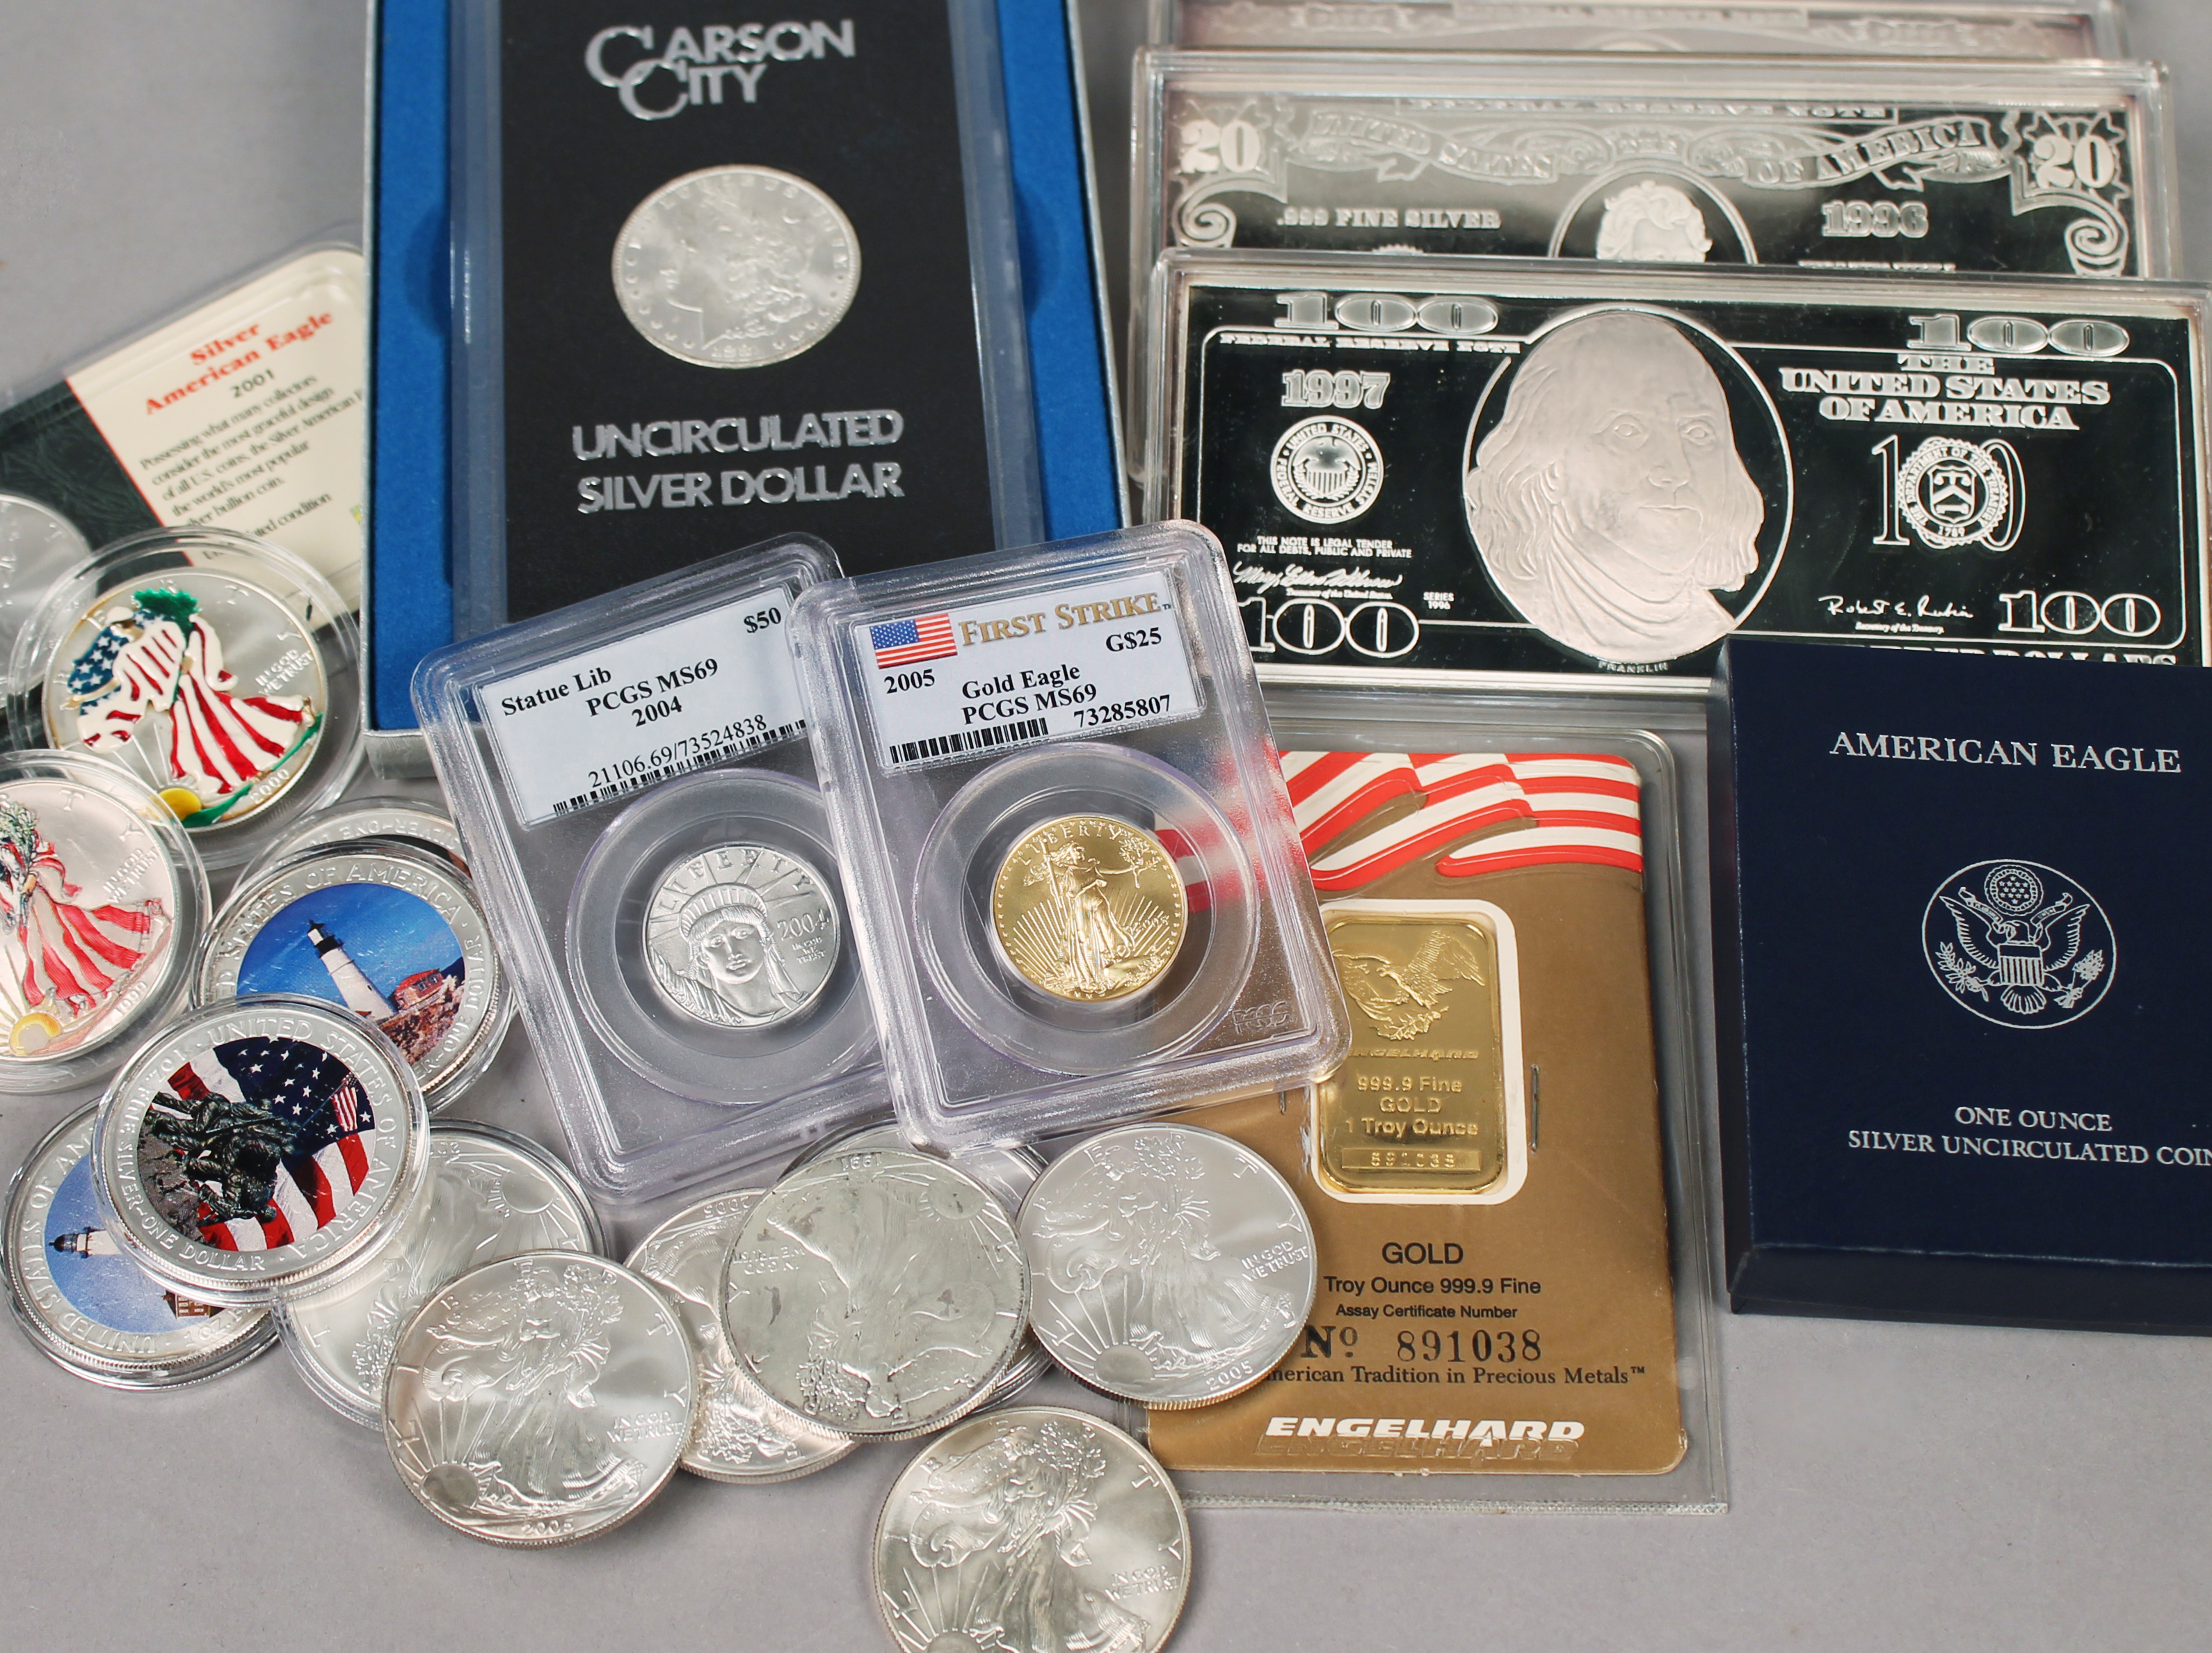 Gold and Silver Bullion Coins